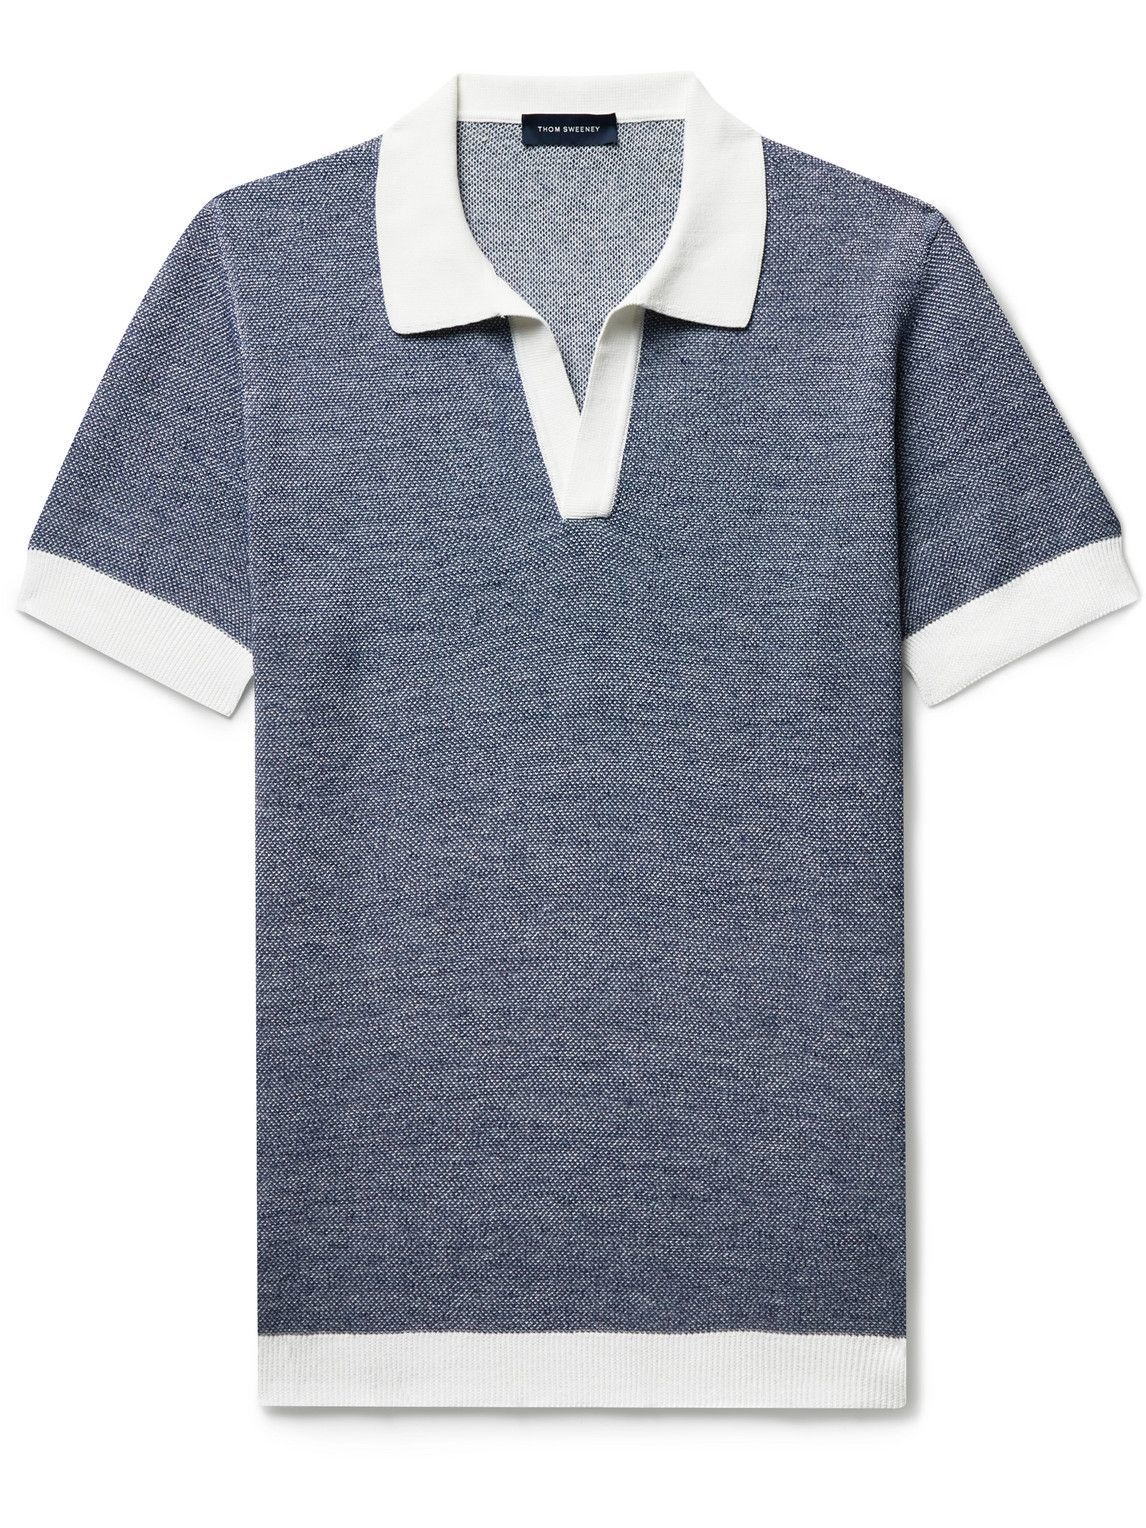 Thom Sweeney - Cotton and Linen-Blend Polo Shirt - Blue Thom Sweeney